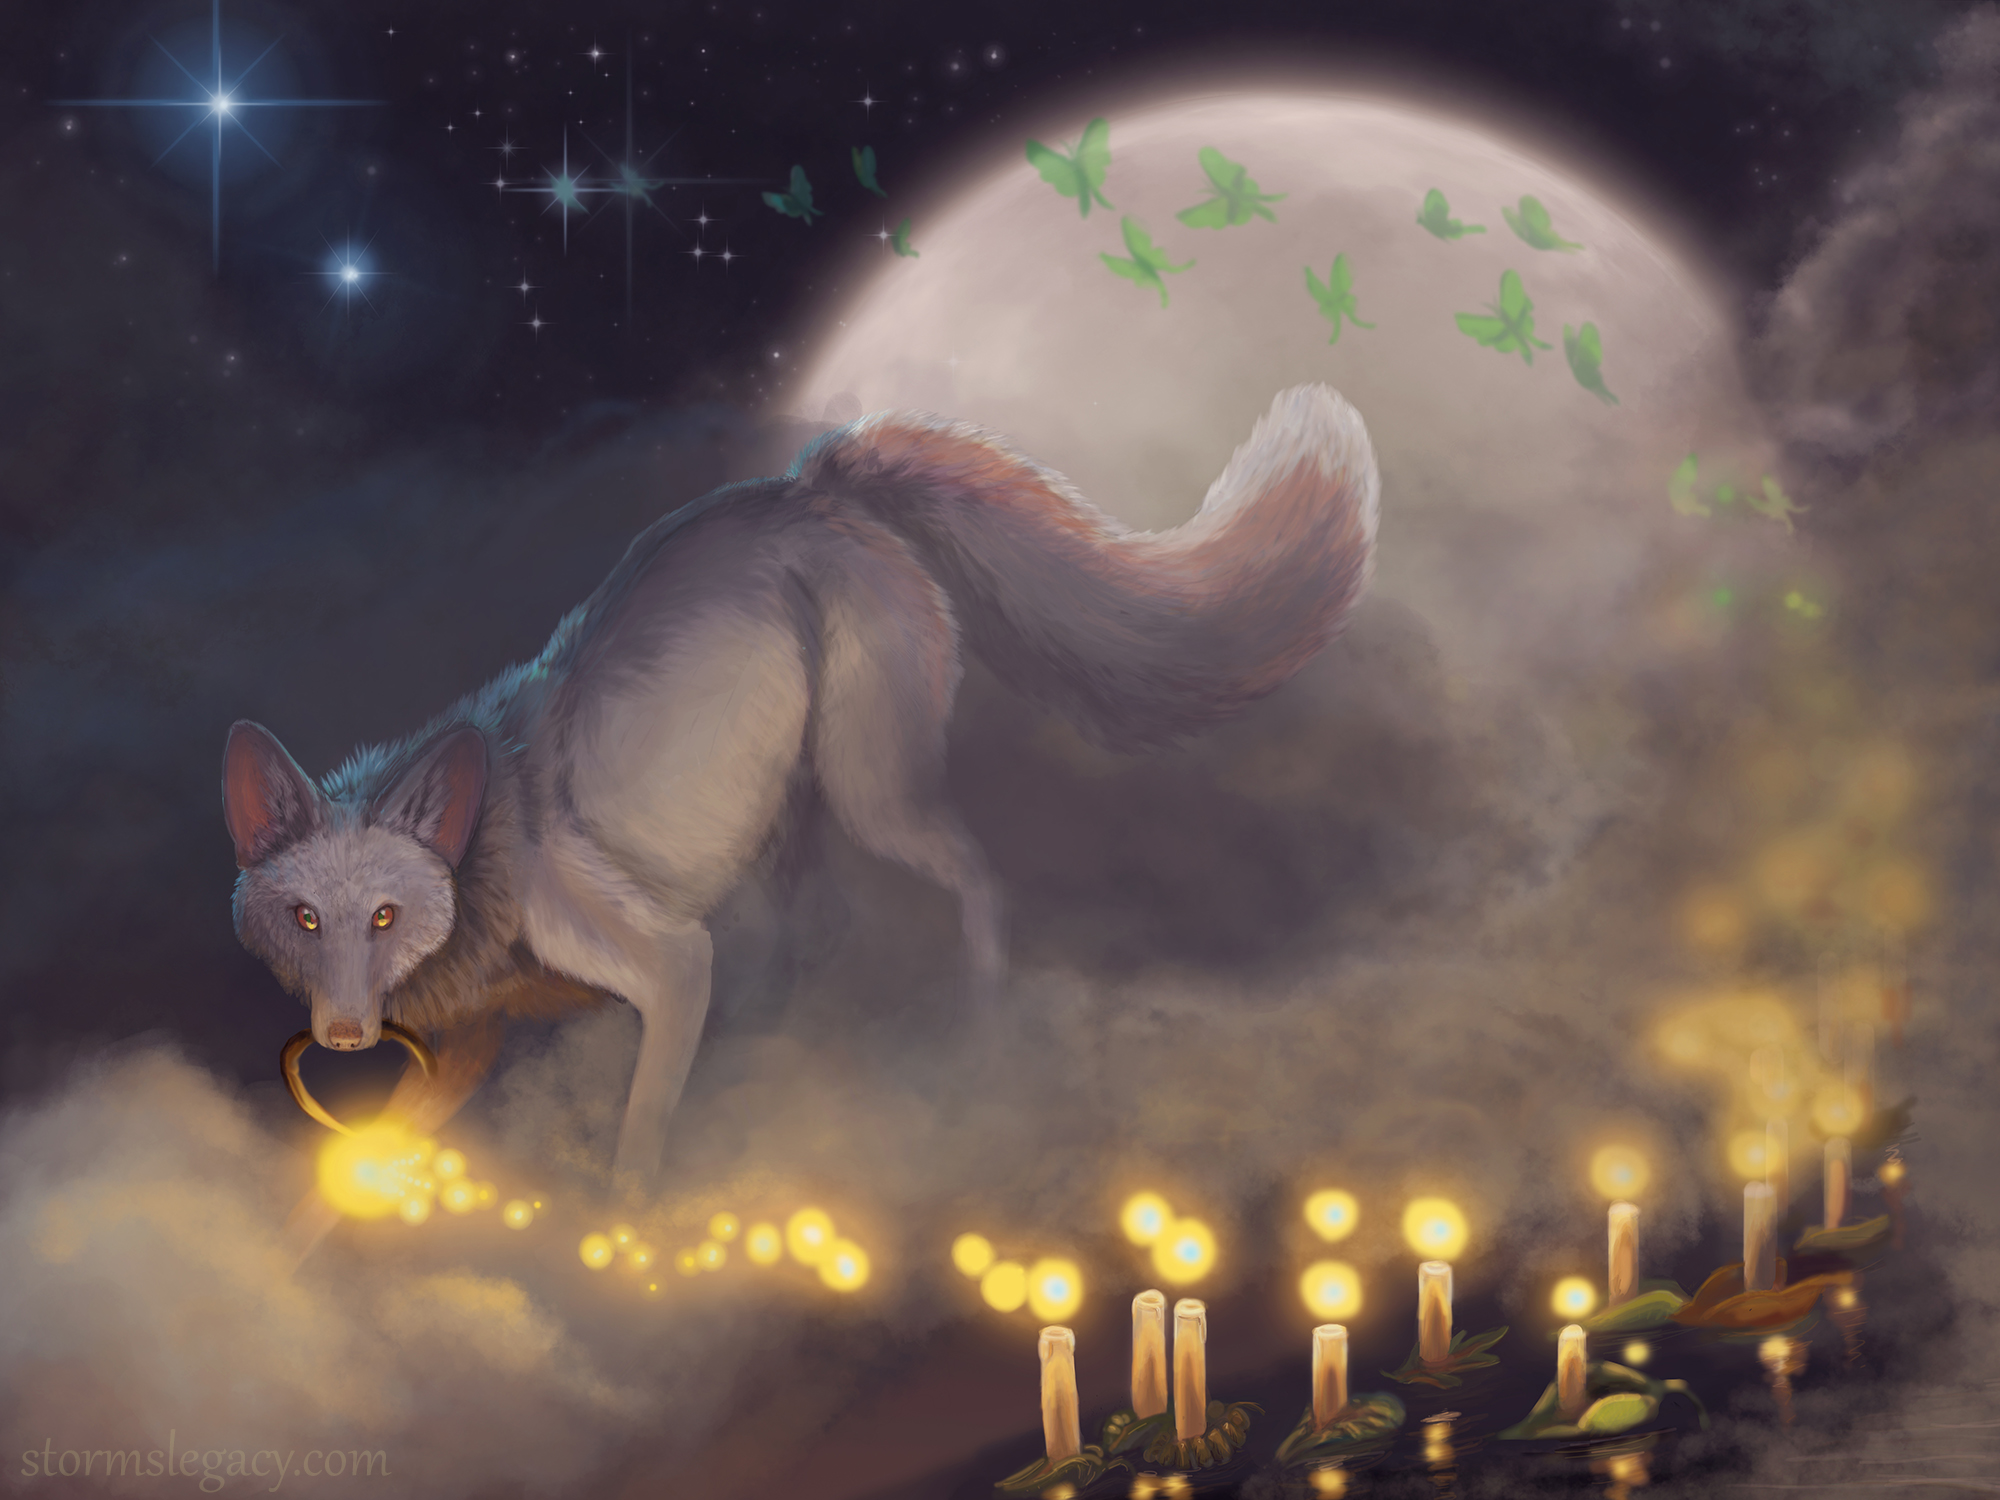 Candleight Digital Painting By Stormslegacy